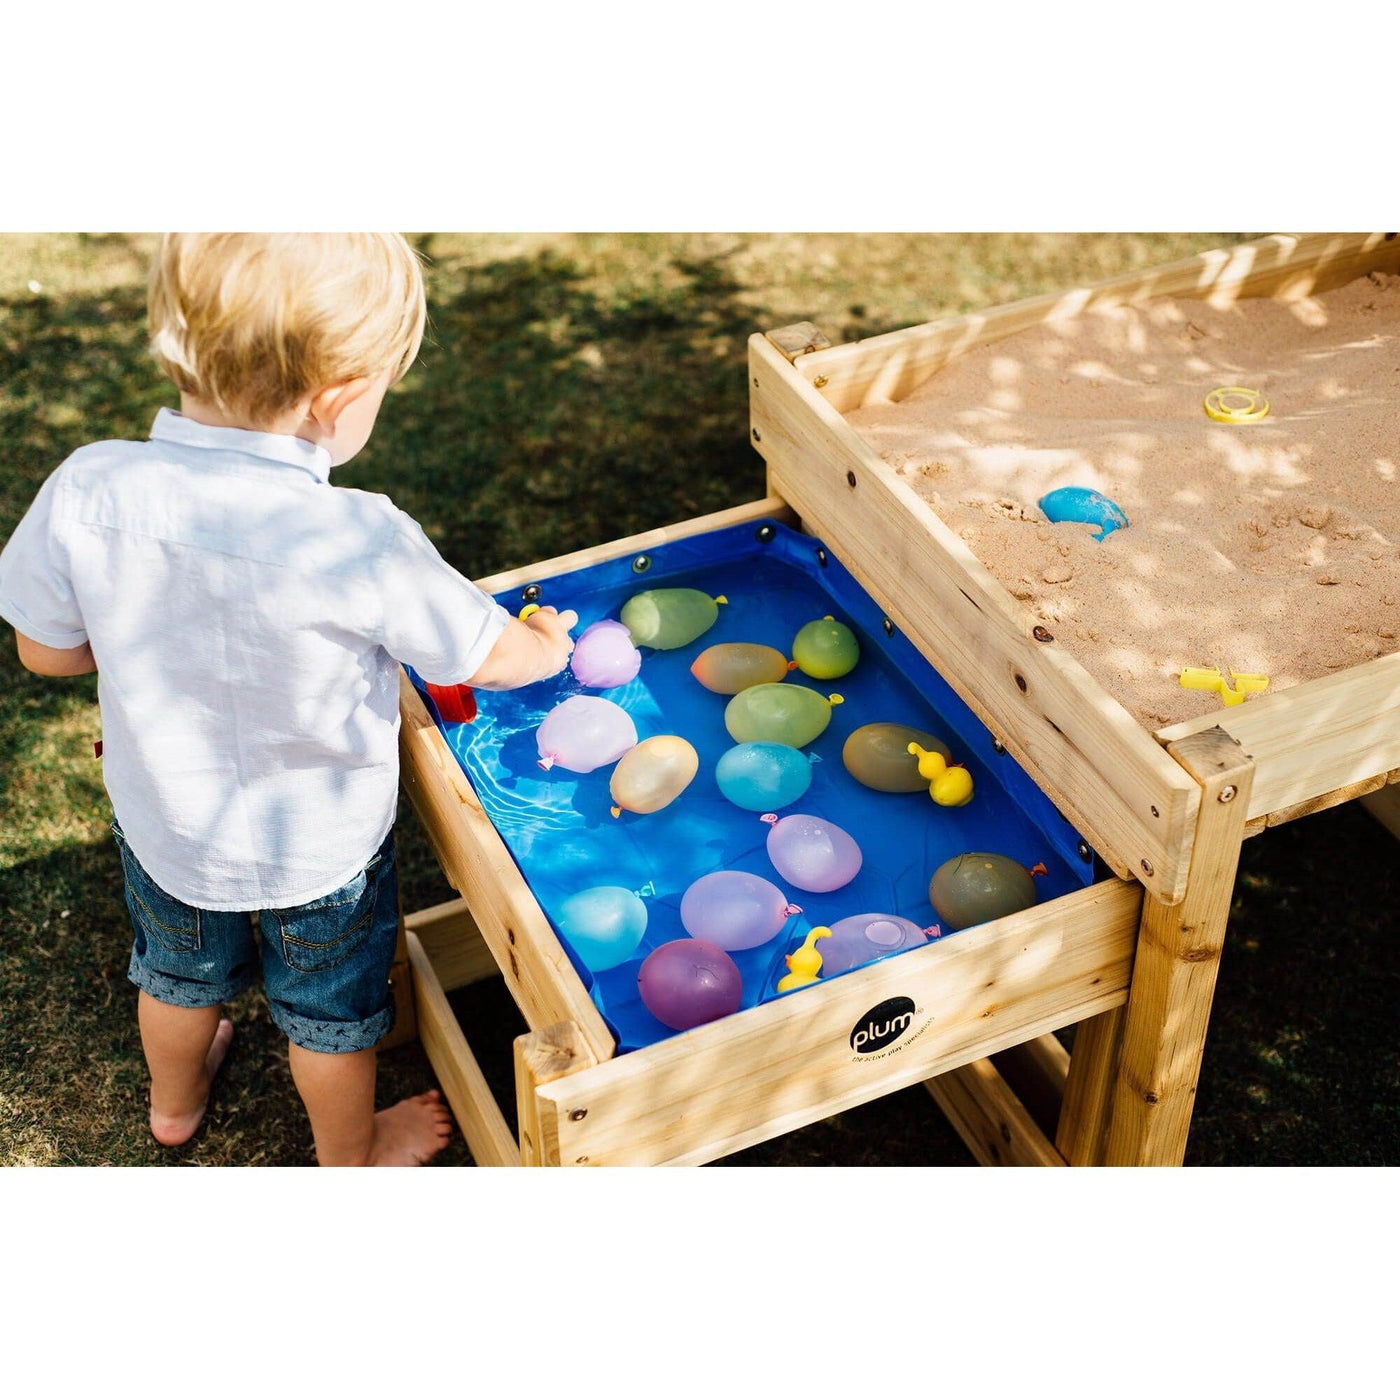 Plum® Sandy Bay Wooden Play Tables - Natural